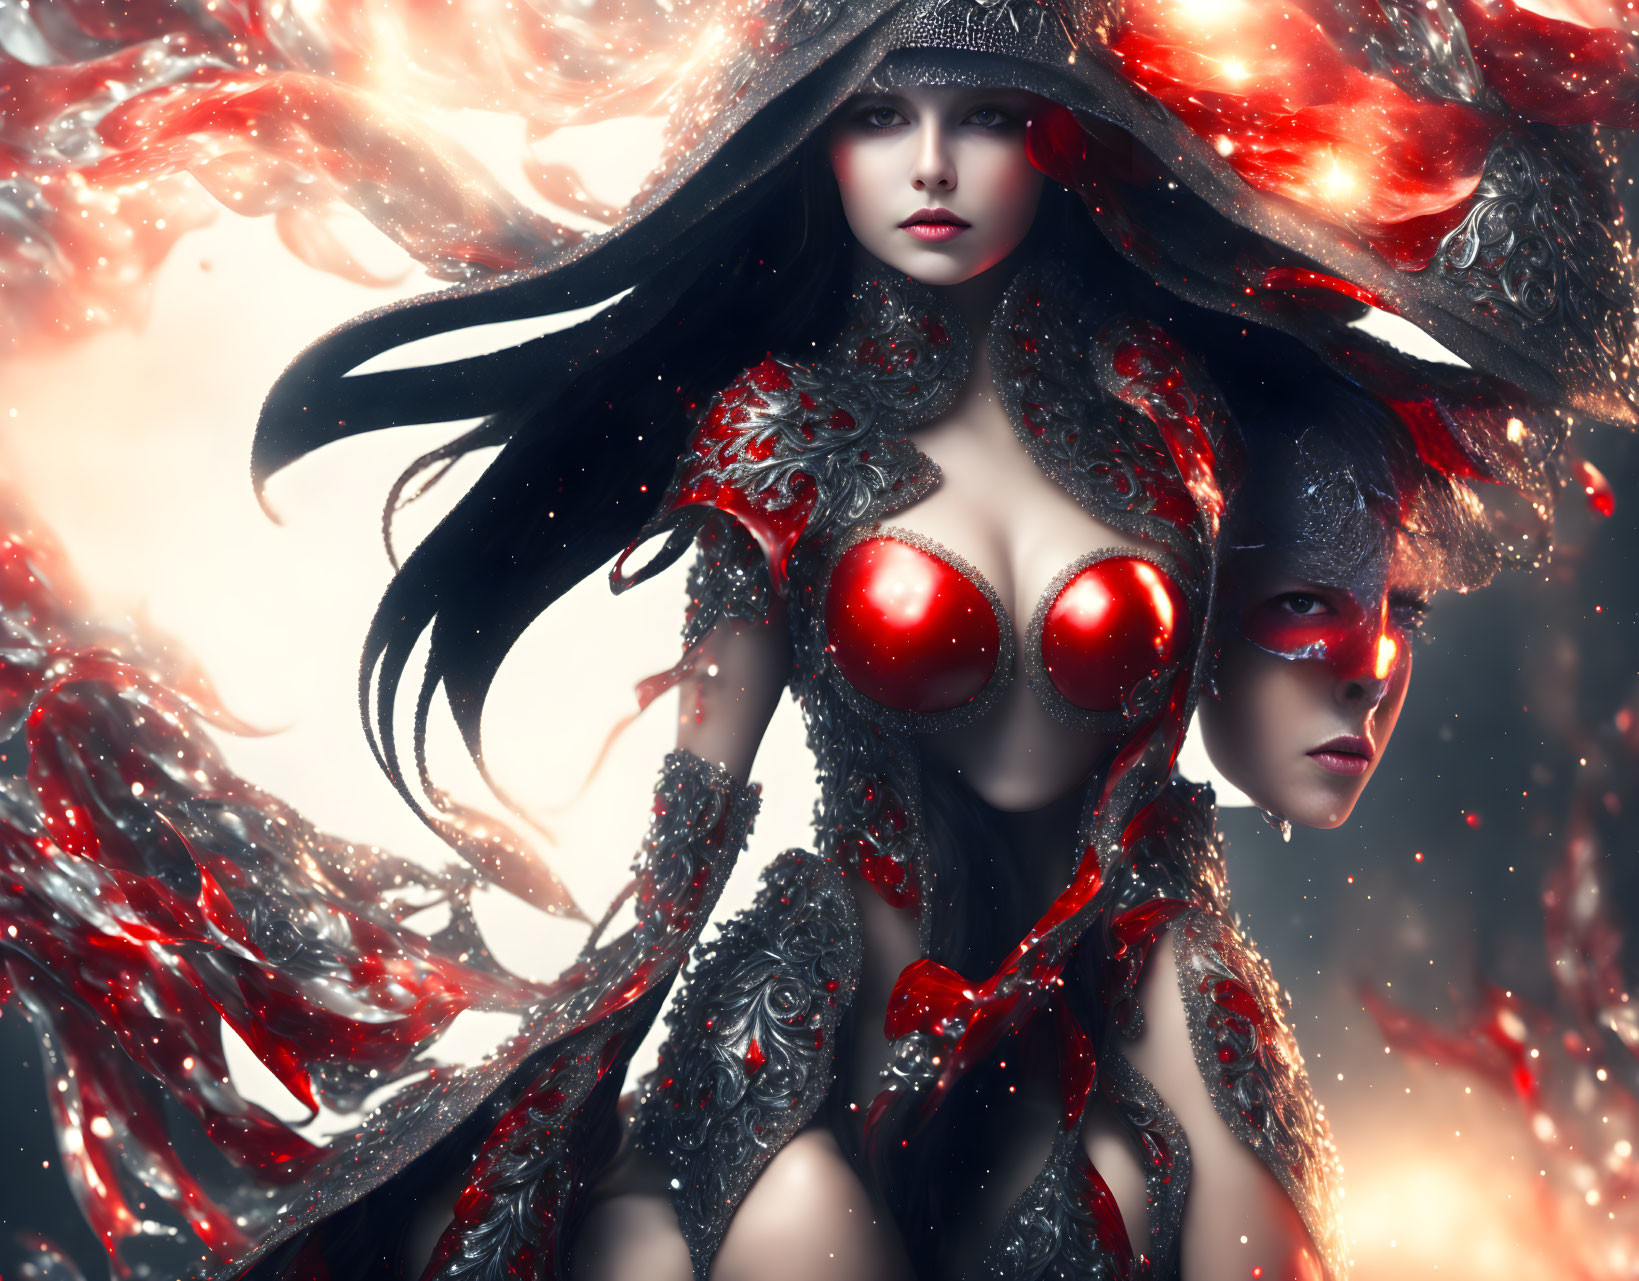 Mystical red and silver figures in elaborate attire on ethereal backdrop